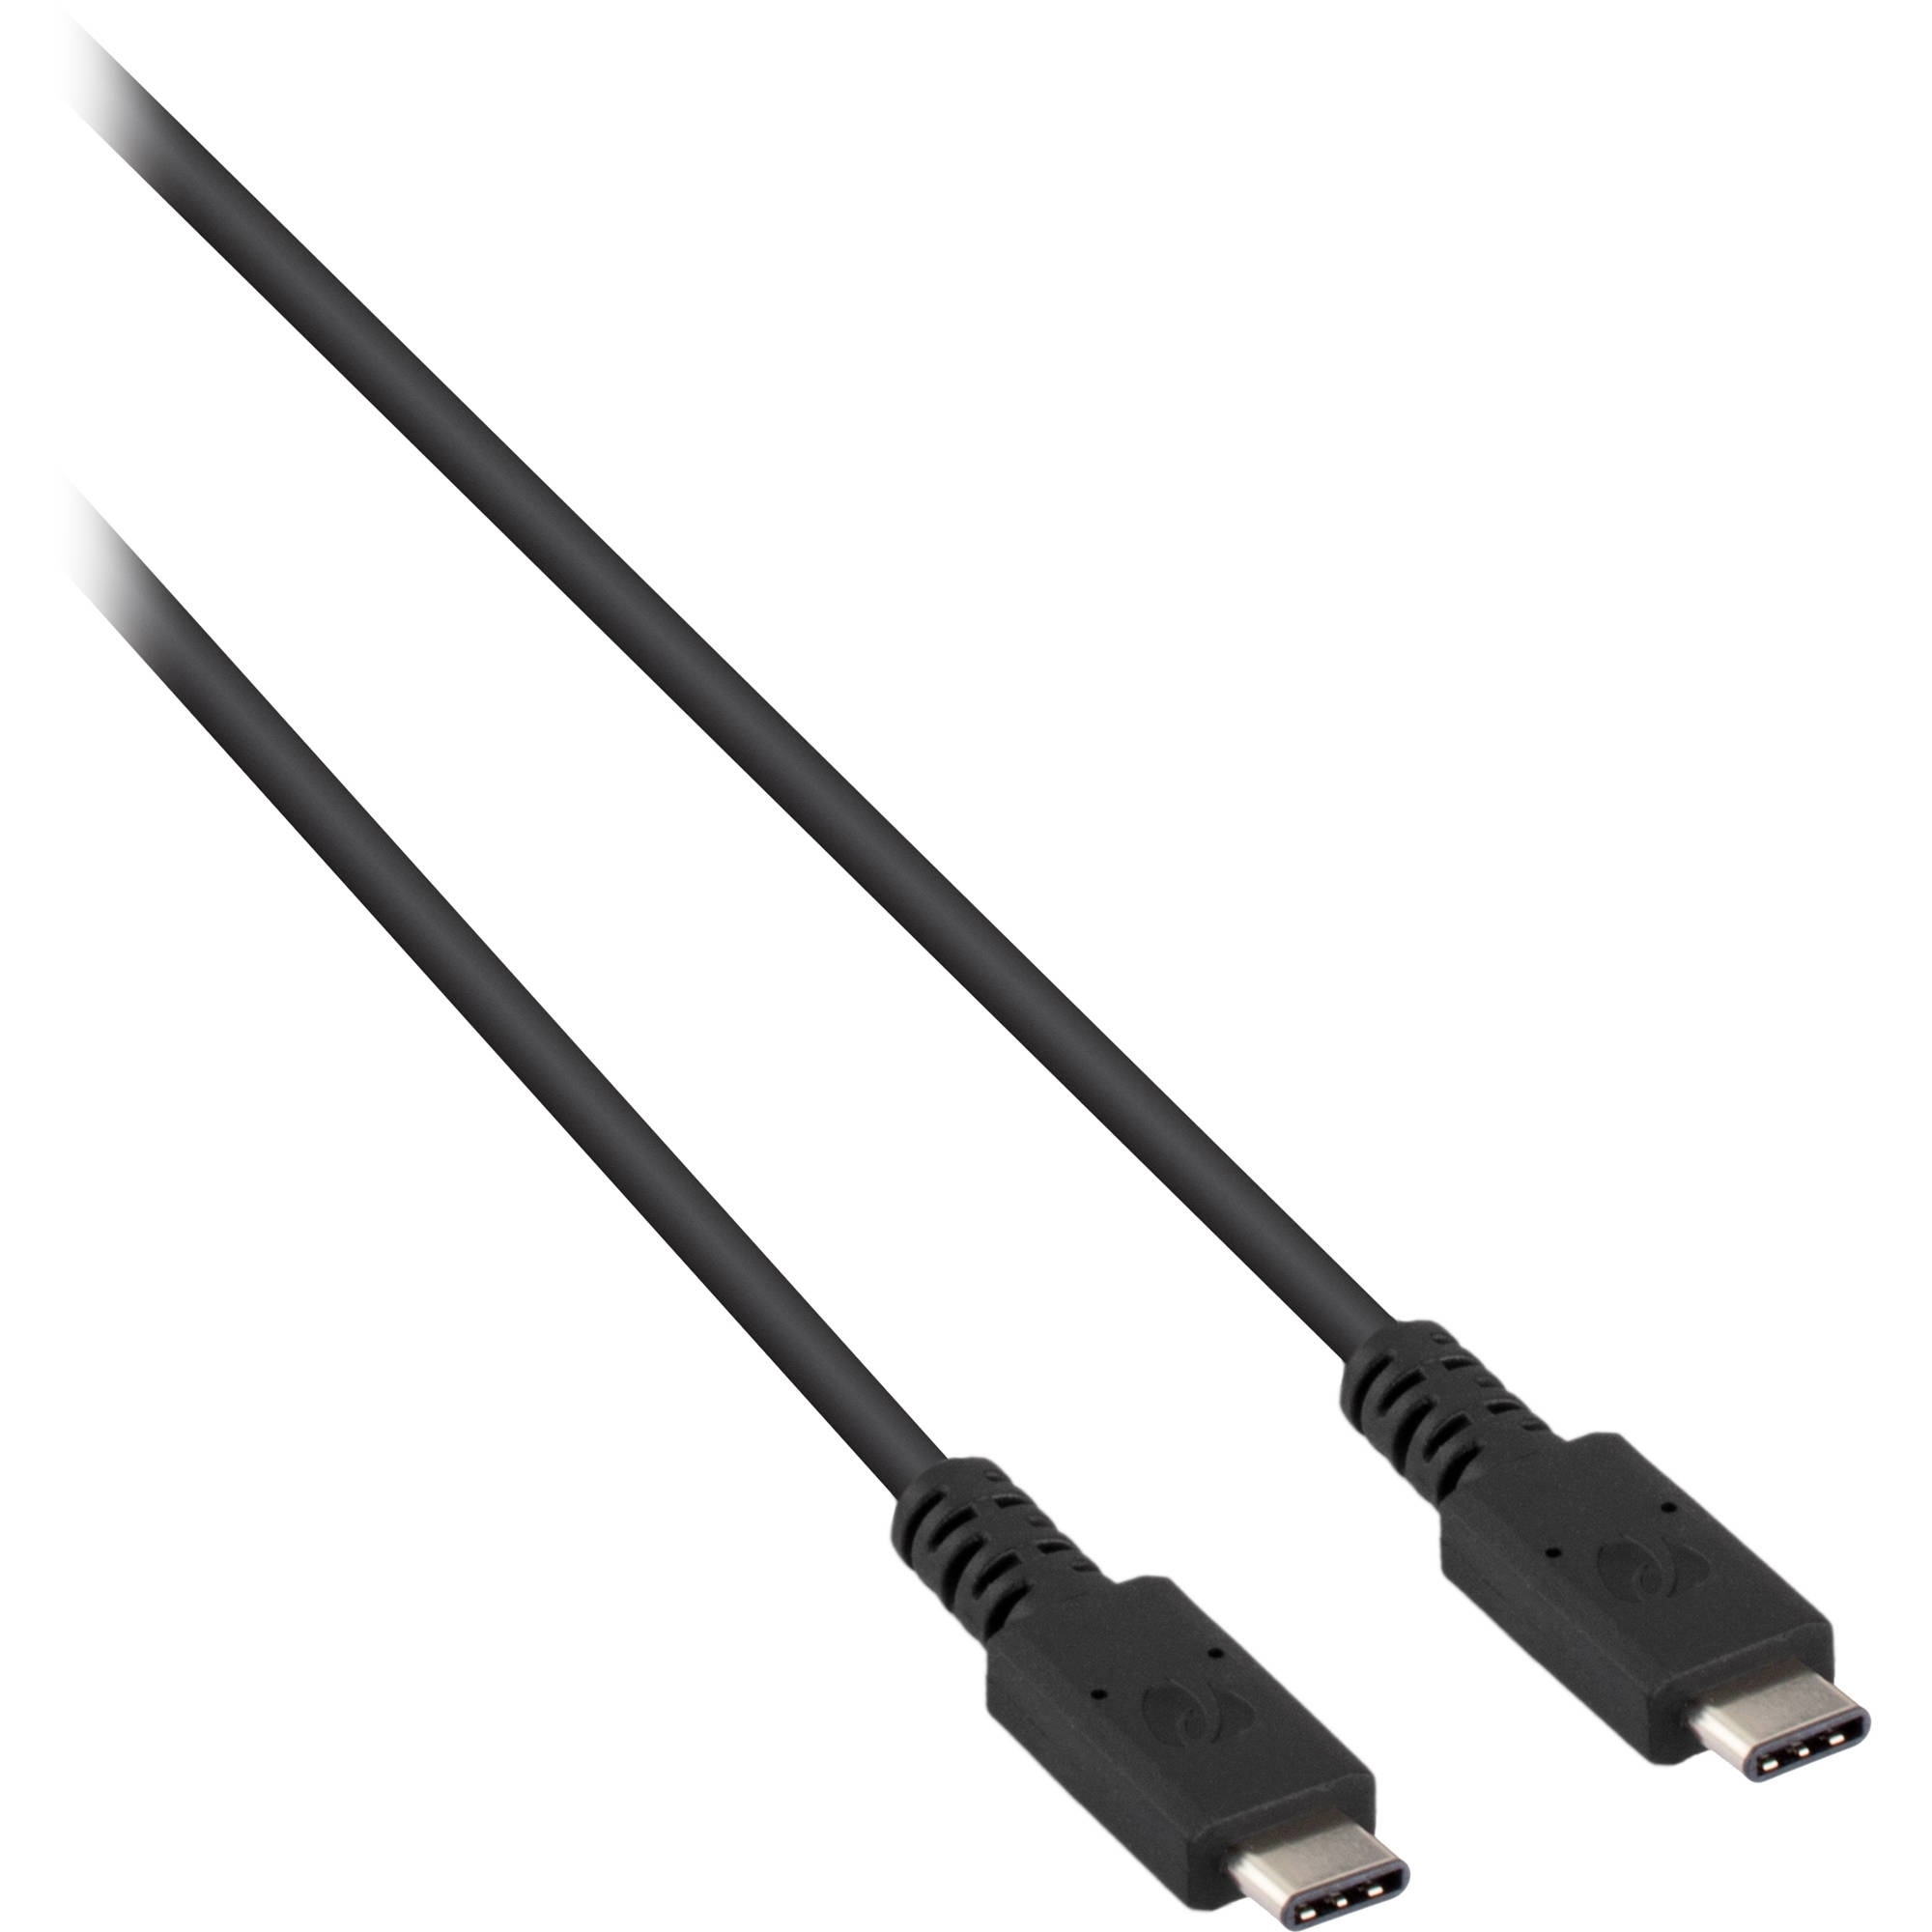 Pearstone USB 2.0 Type-C Charge & Sync Cable (3', Black)